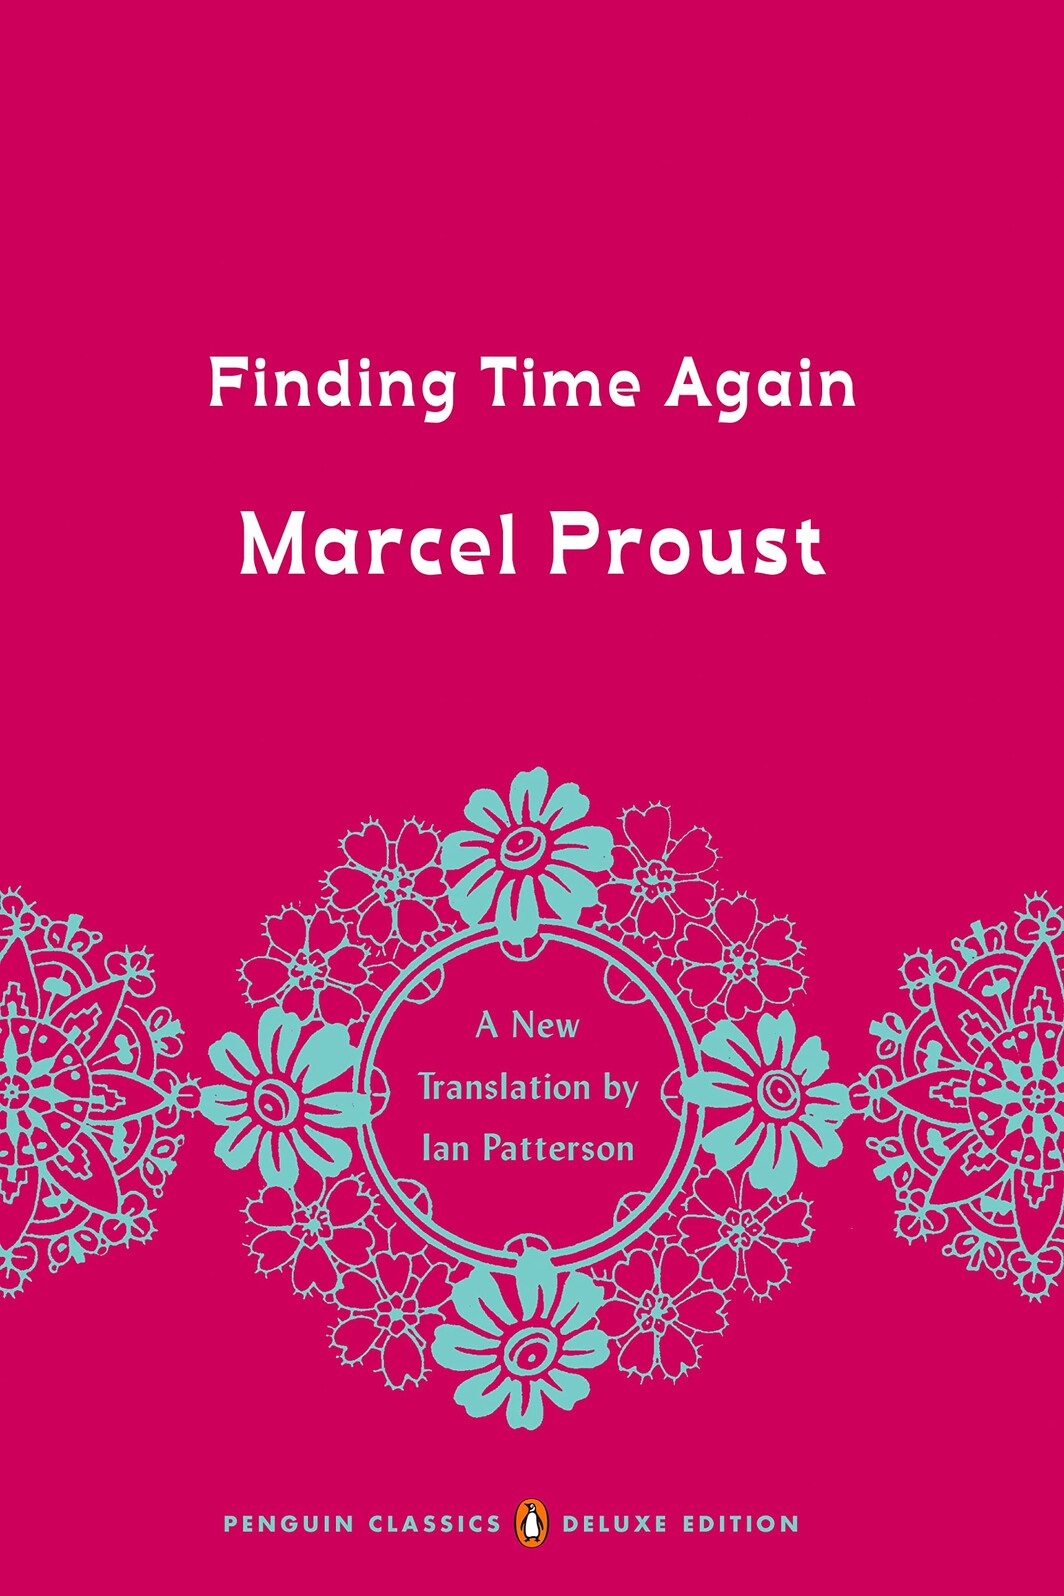 The cover of Finding Time Again